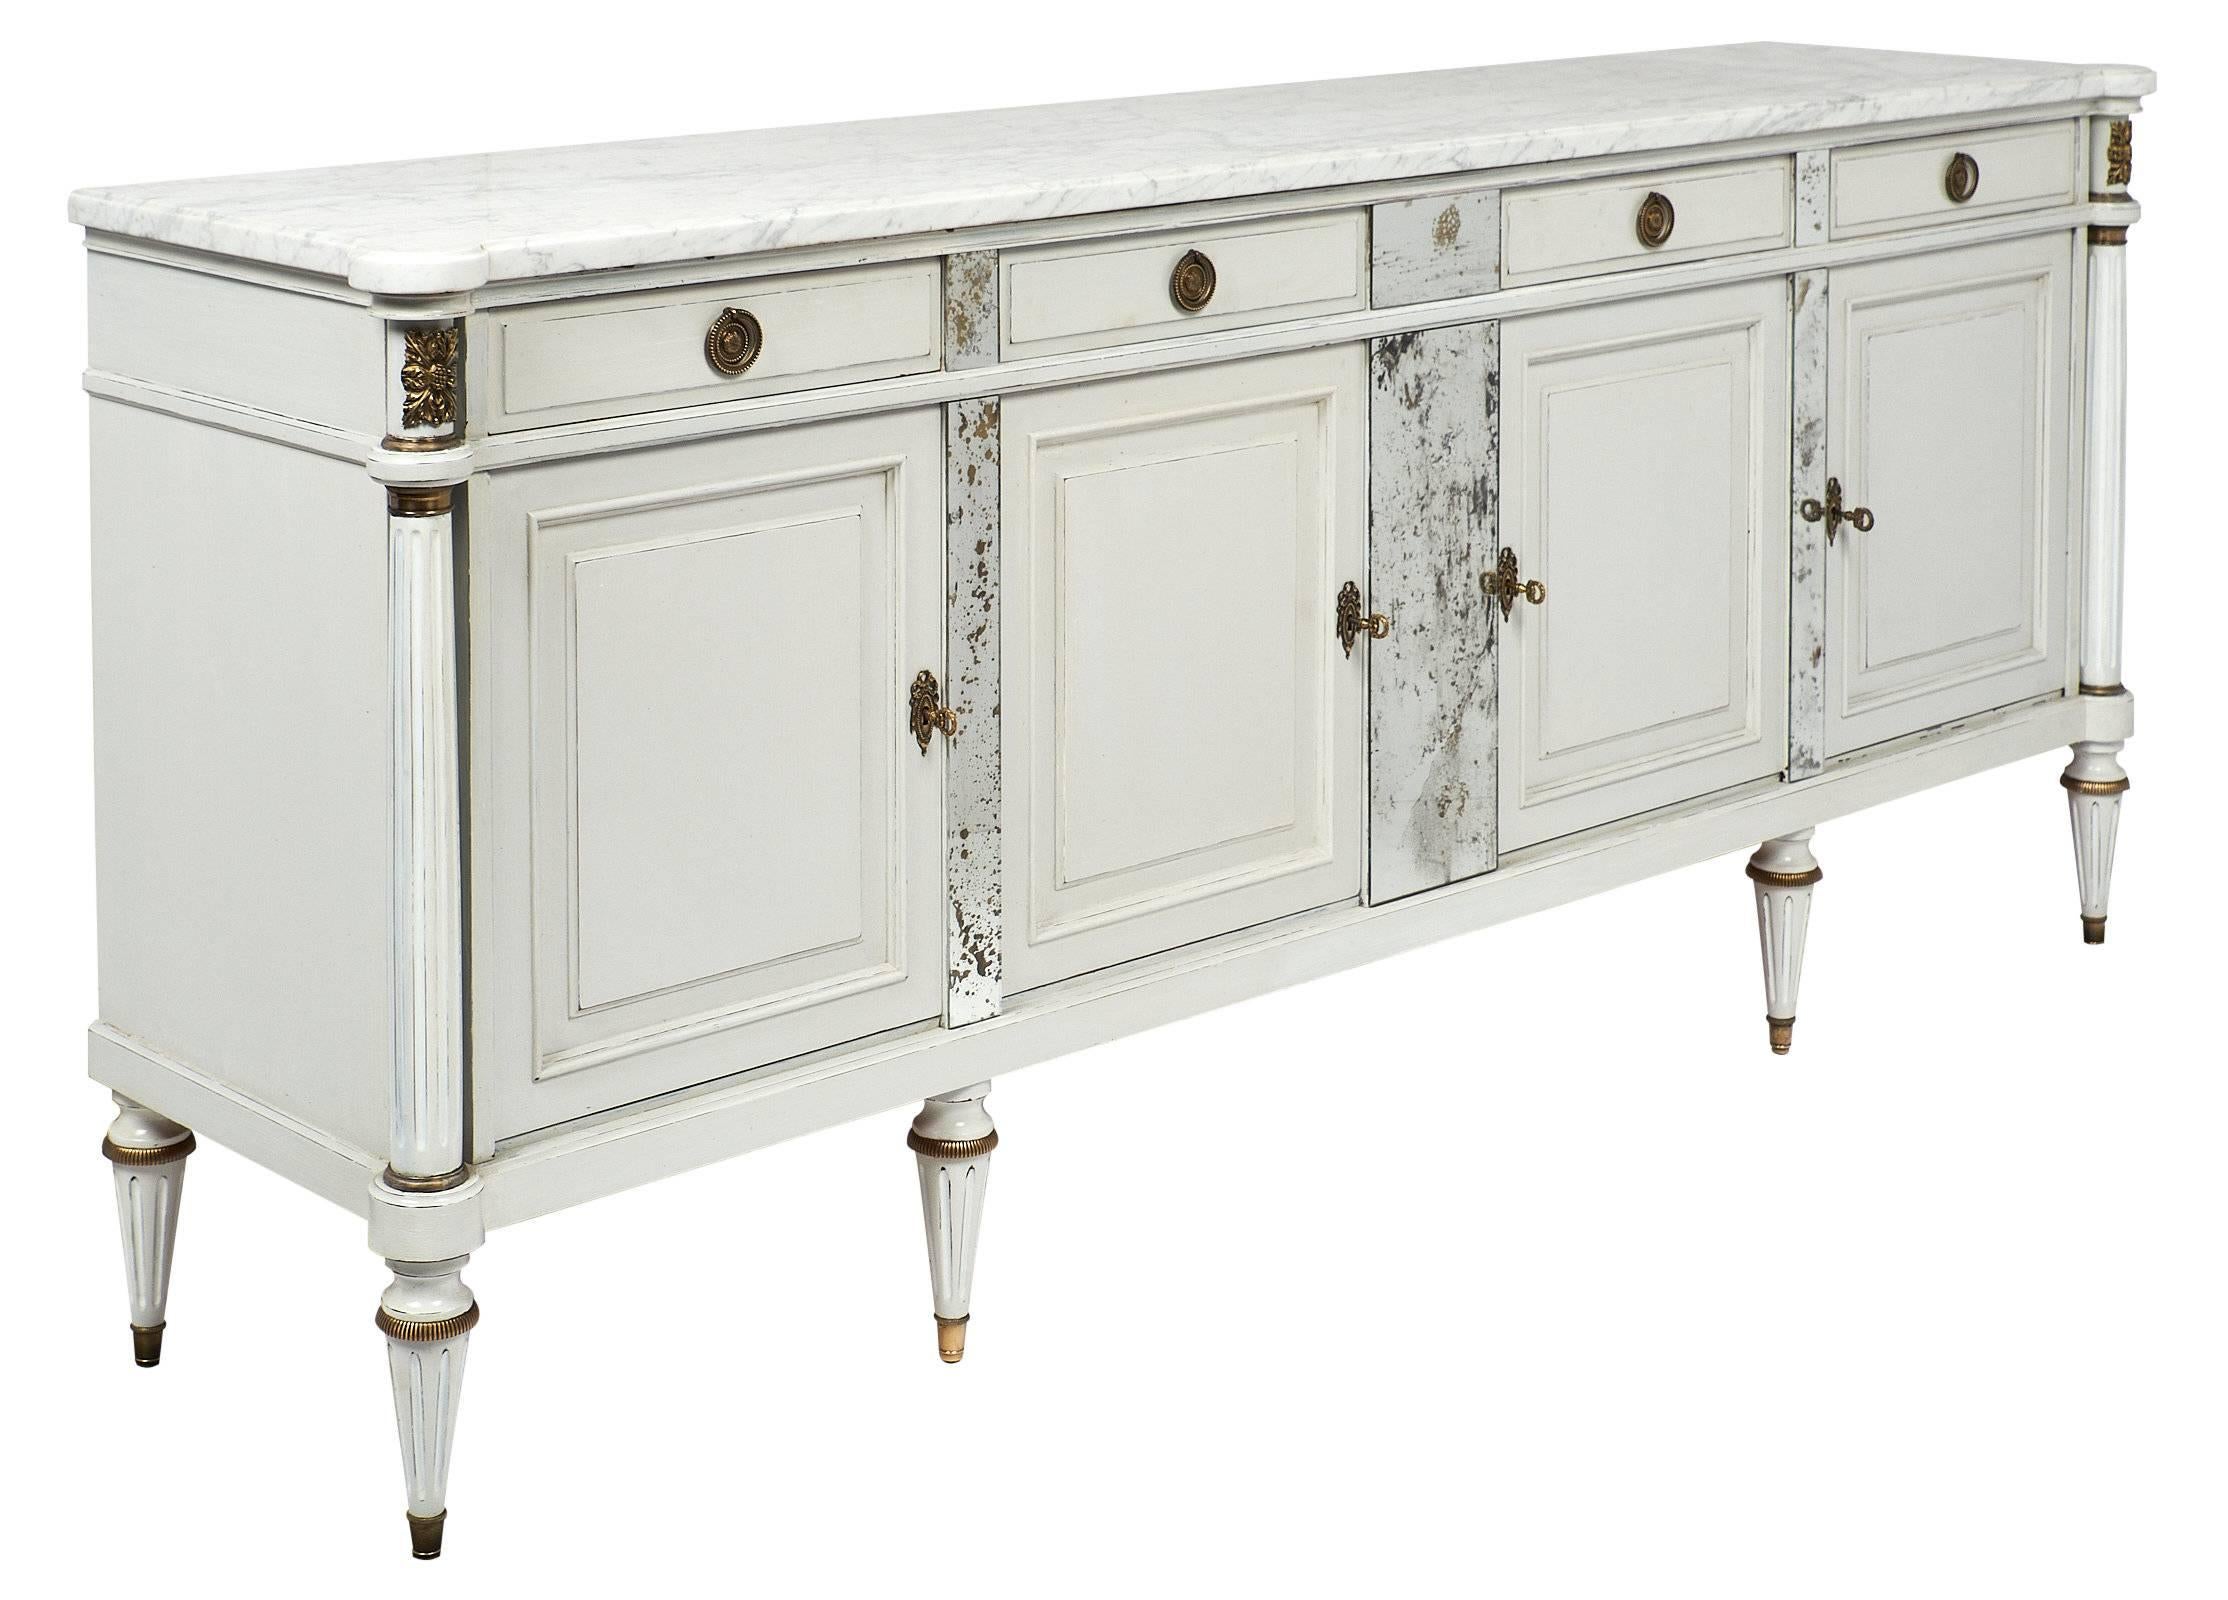 A Louis XVI cherrywood buffet or credenza painted in dove gray and white with four doors and four drawers. There are adjustable shelves inside, and the piece is topped with an impressive veined white Carrara marble slab. It also features side fluted